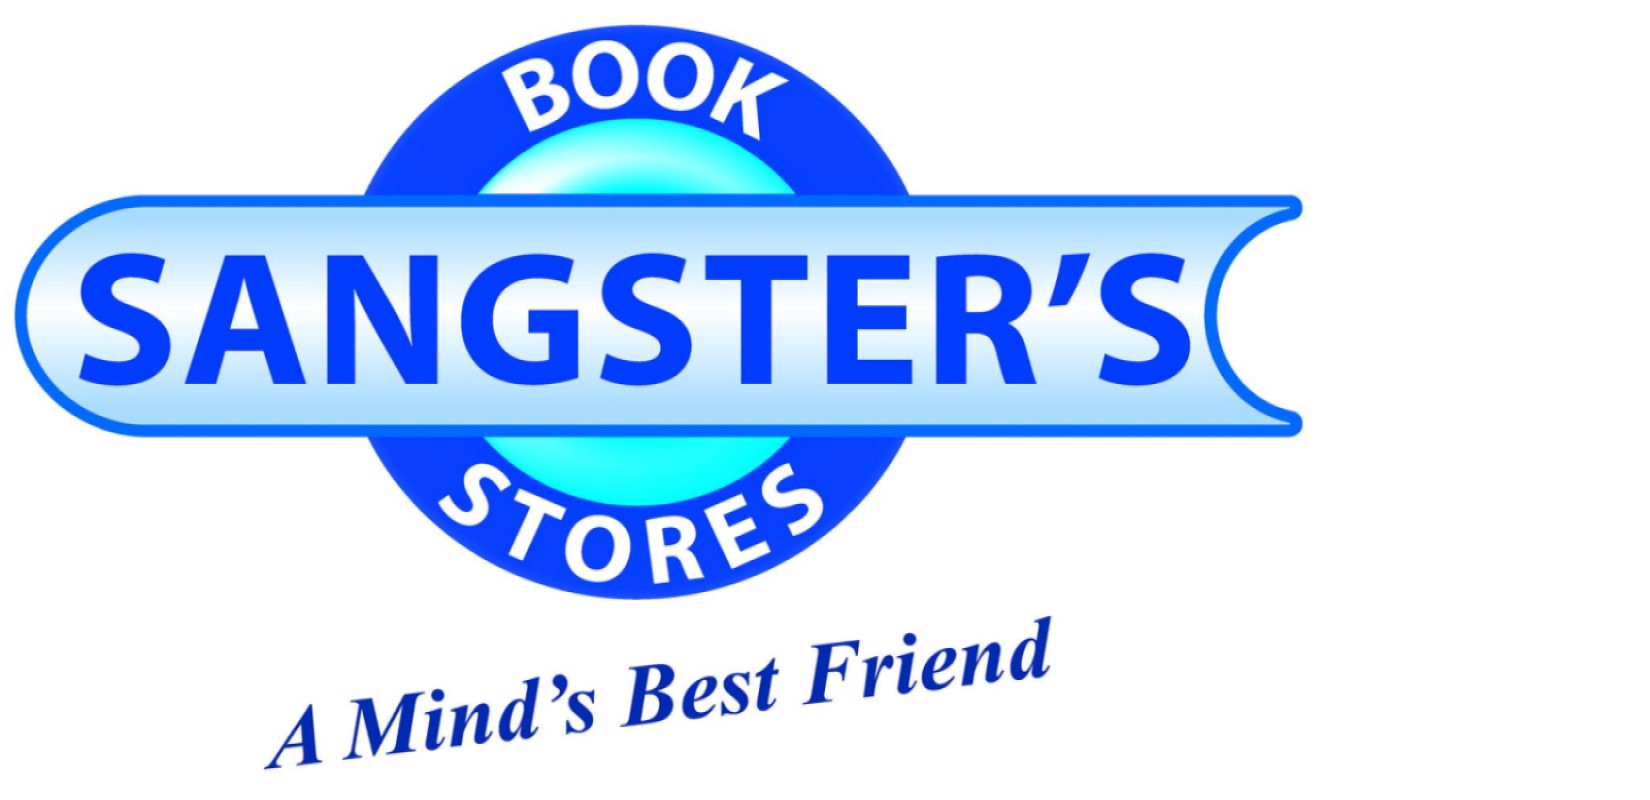 Sangster's Book Stores Ltd - Internet Cafes & Wireless Access Points